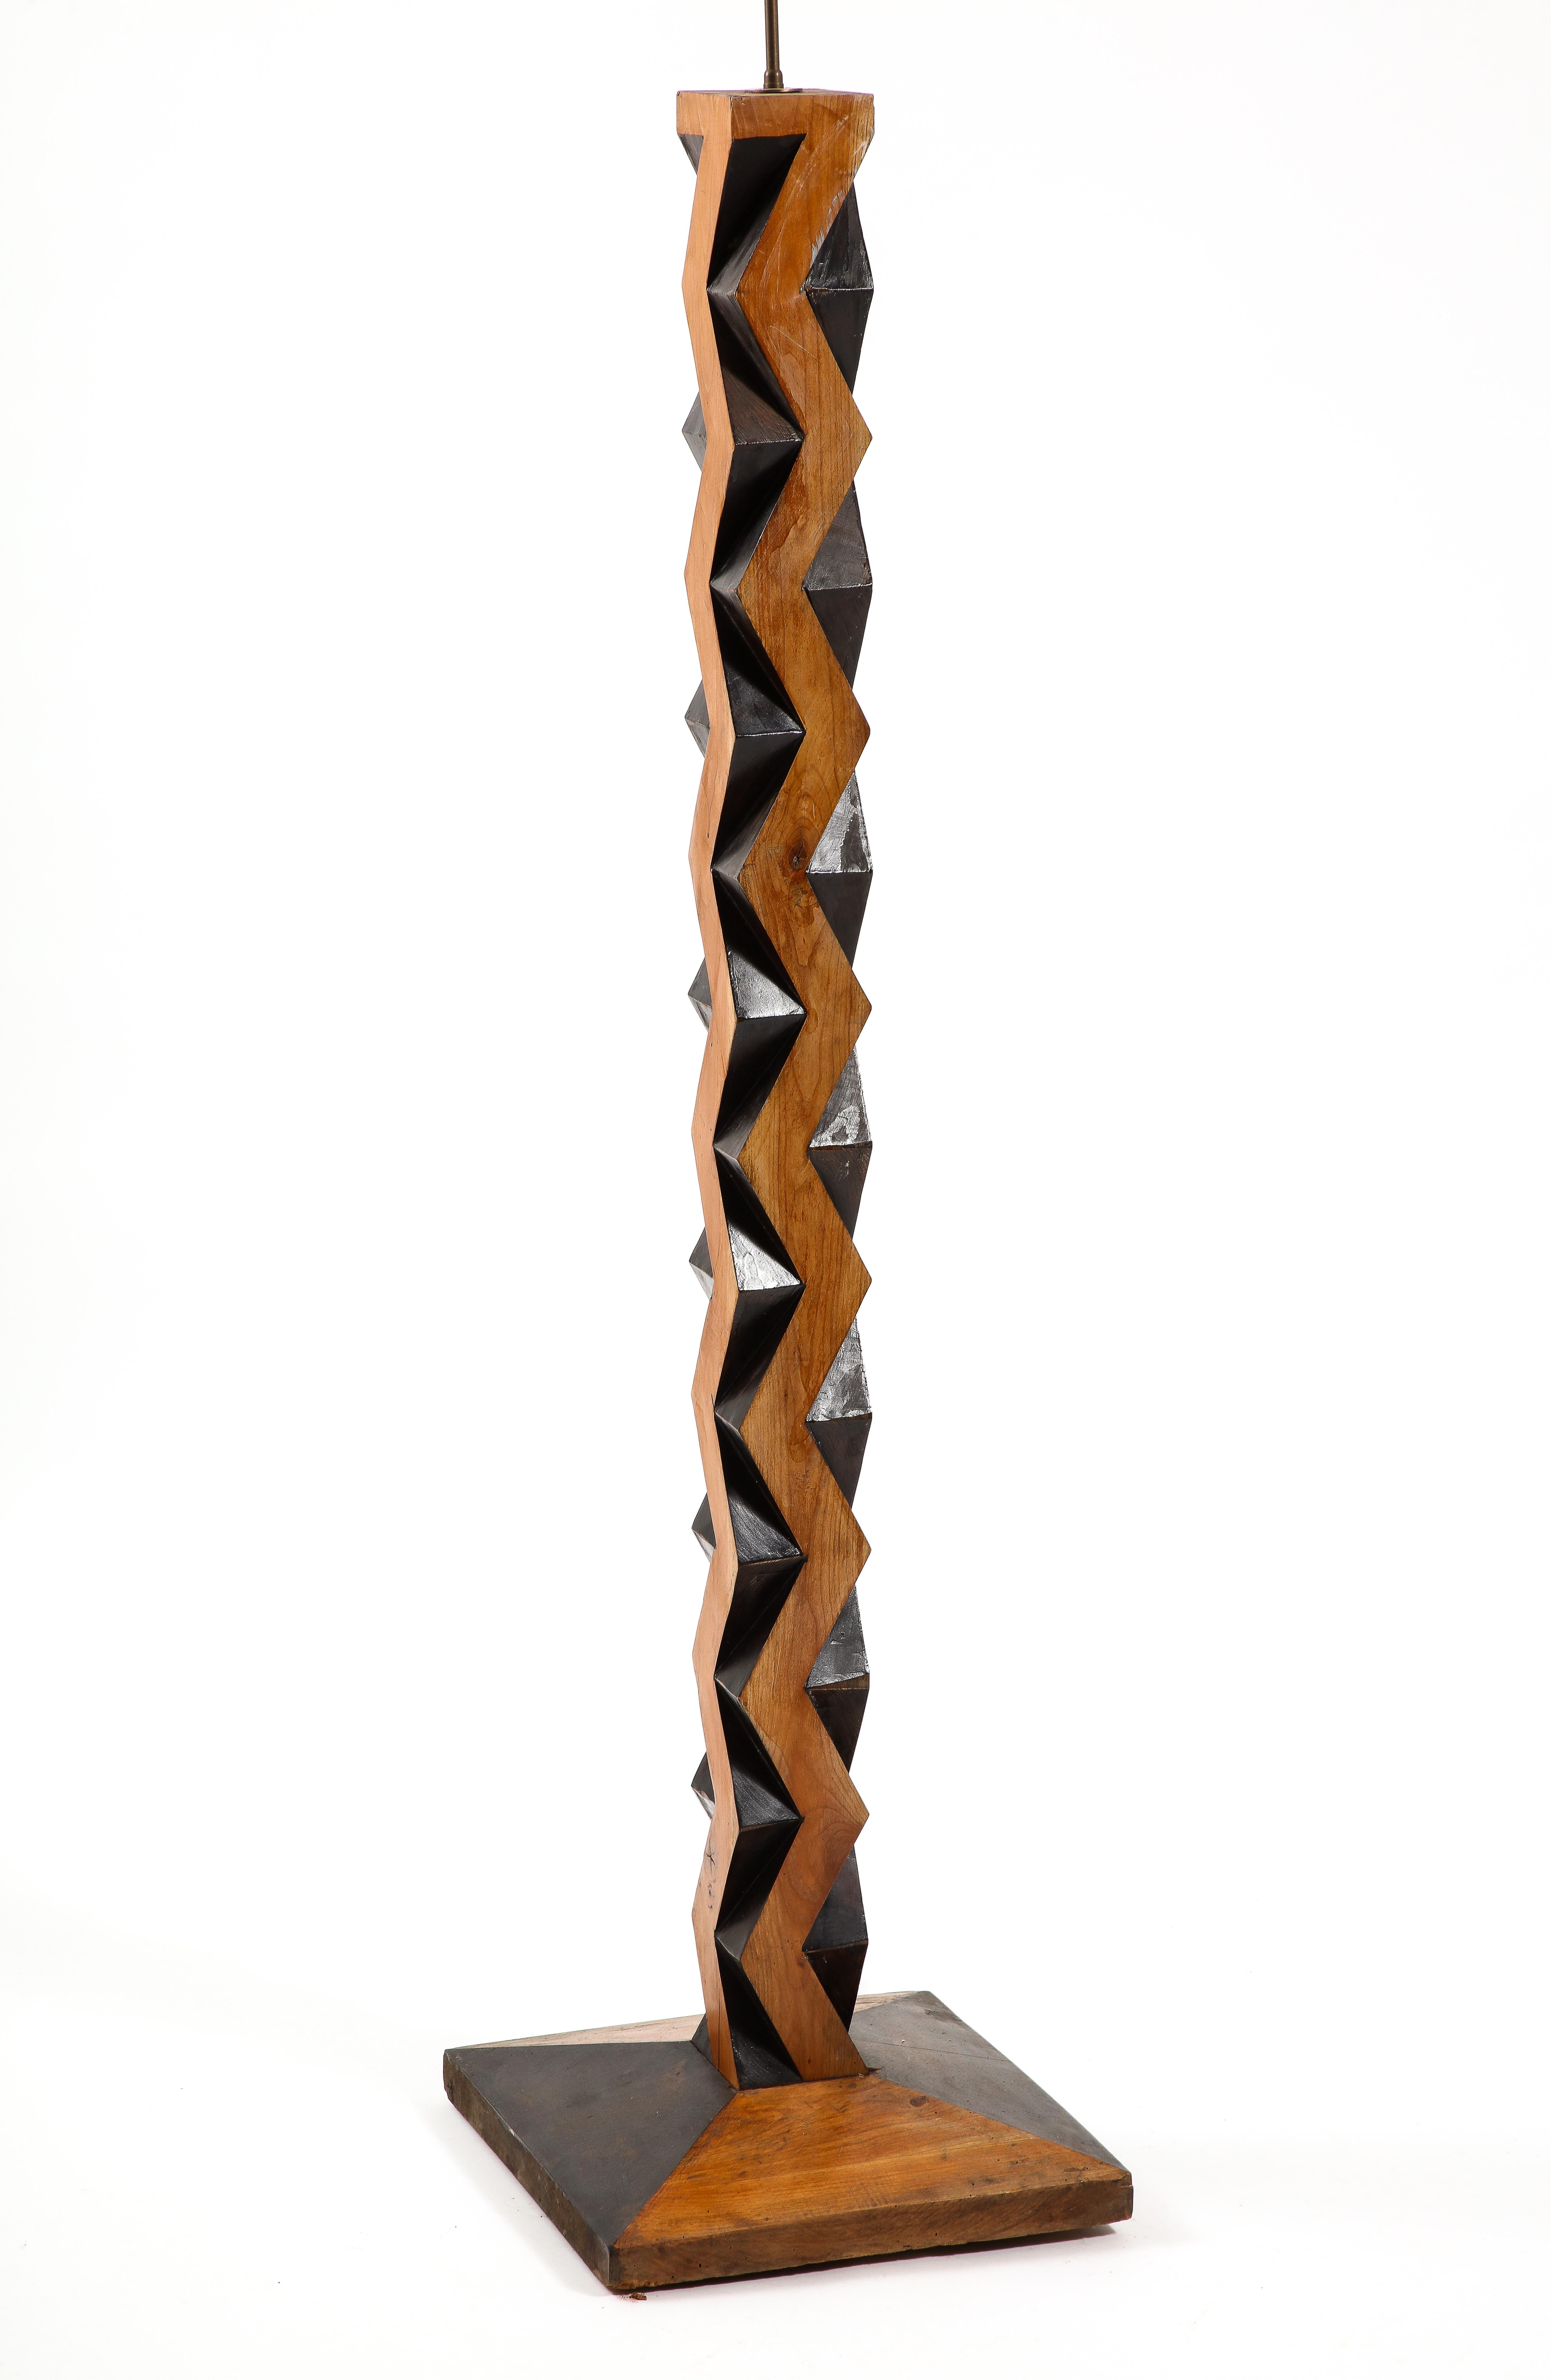 Fantastic geometric wood floor lamp with two-tone finish, carved of solid walnut in a repeating pattern, it is a statement piece.